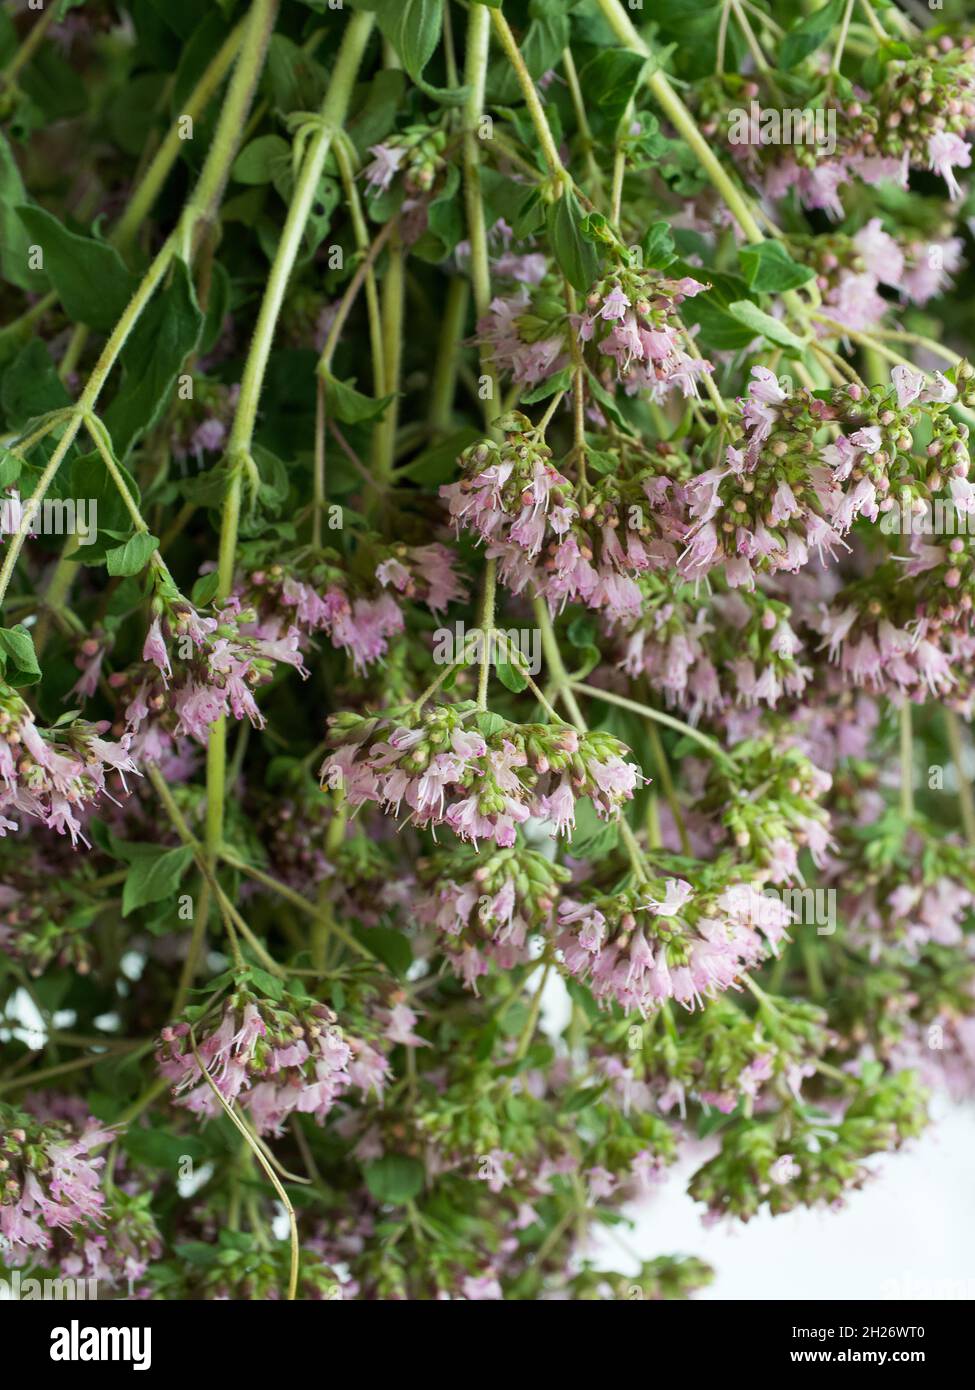 Origanum is a genus of herbaceous perennials and subshrubs in the family Lamiaceae. The plants have strongly aromatic leaves and abundant tubular flow Stock Photo